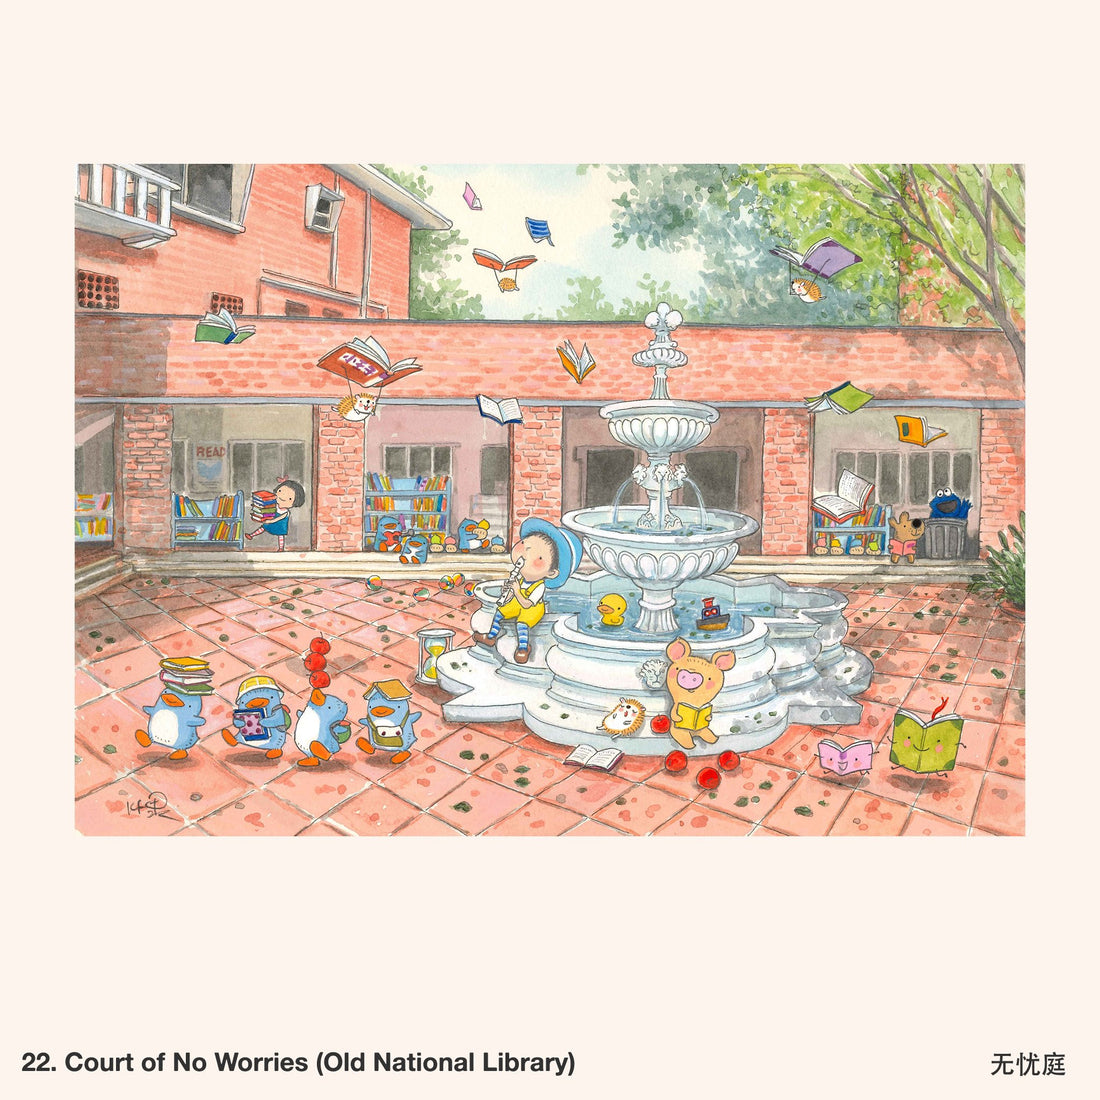 22. Court of No Worries (Old National Library) Artwork